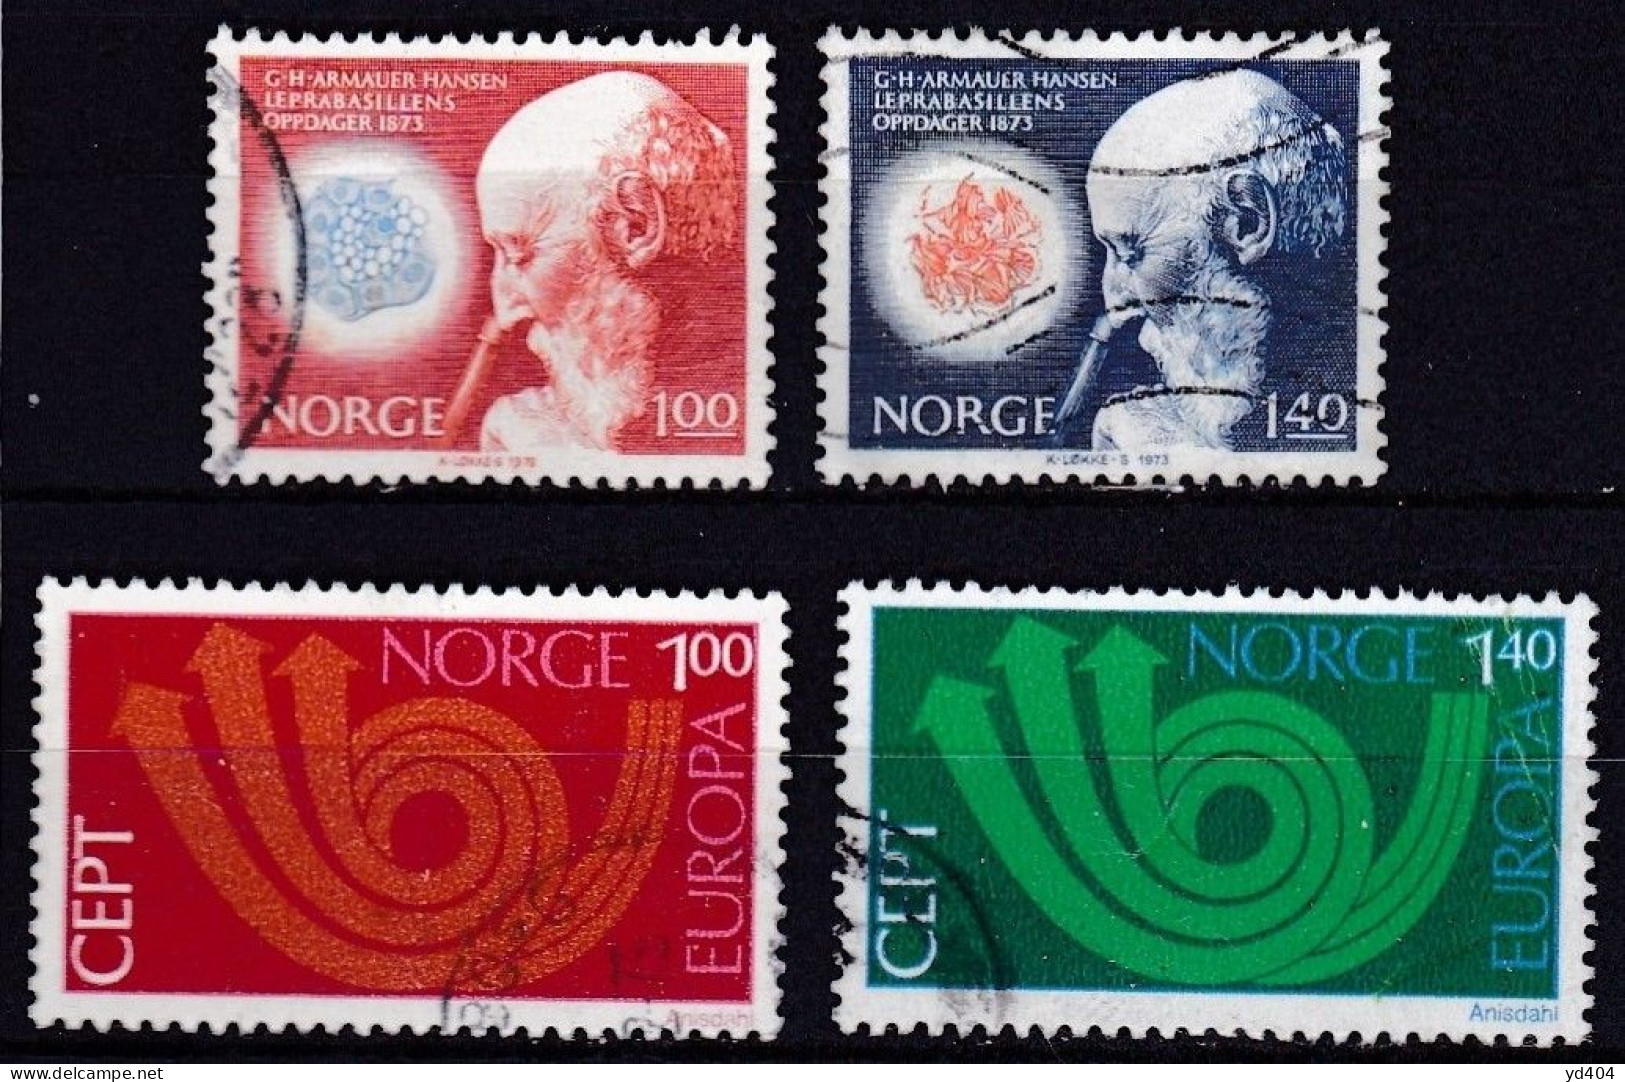 NO087 – NORVEGE - NORWAY – 1973 – FULL YEAR SET – Y&T # 614/31 USED 15,70 € - Used Stamps